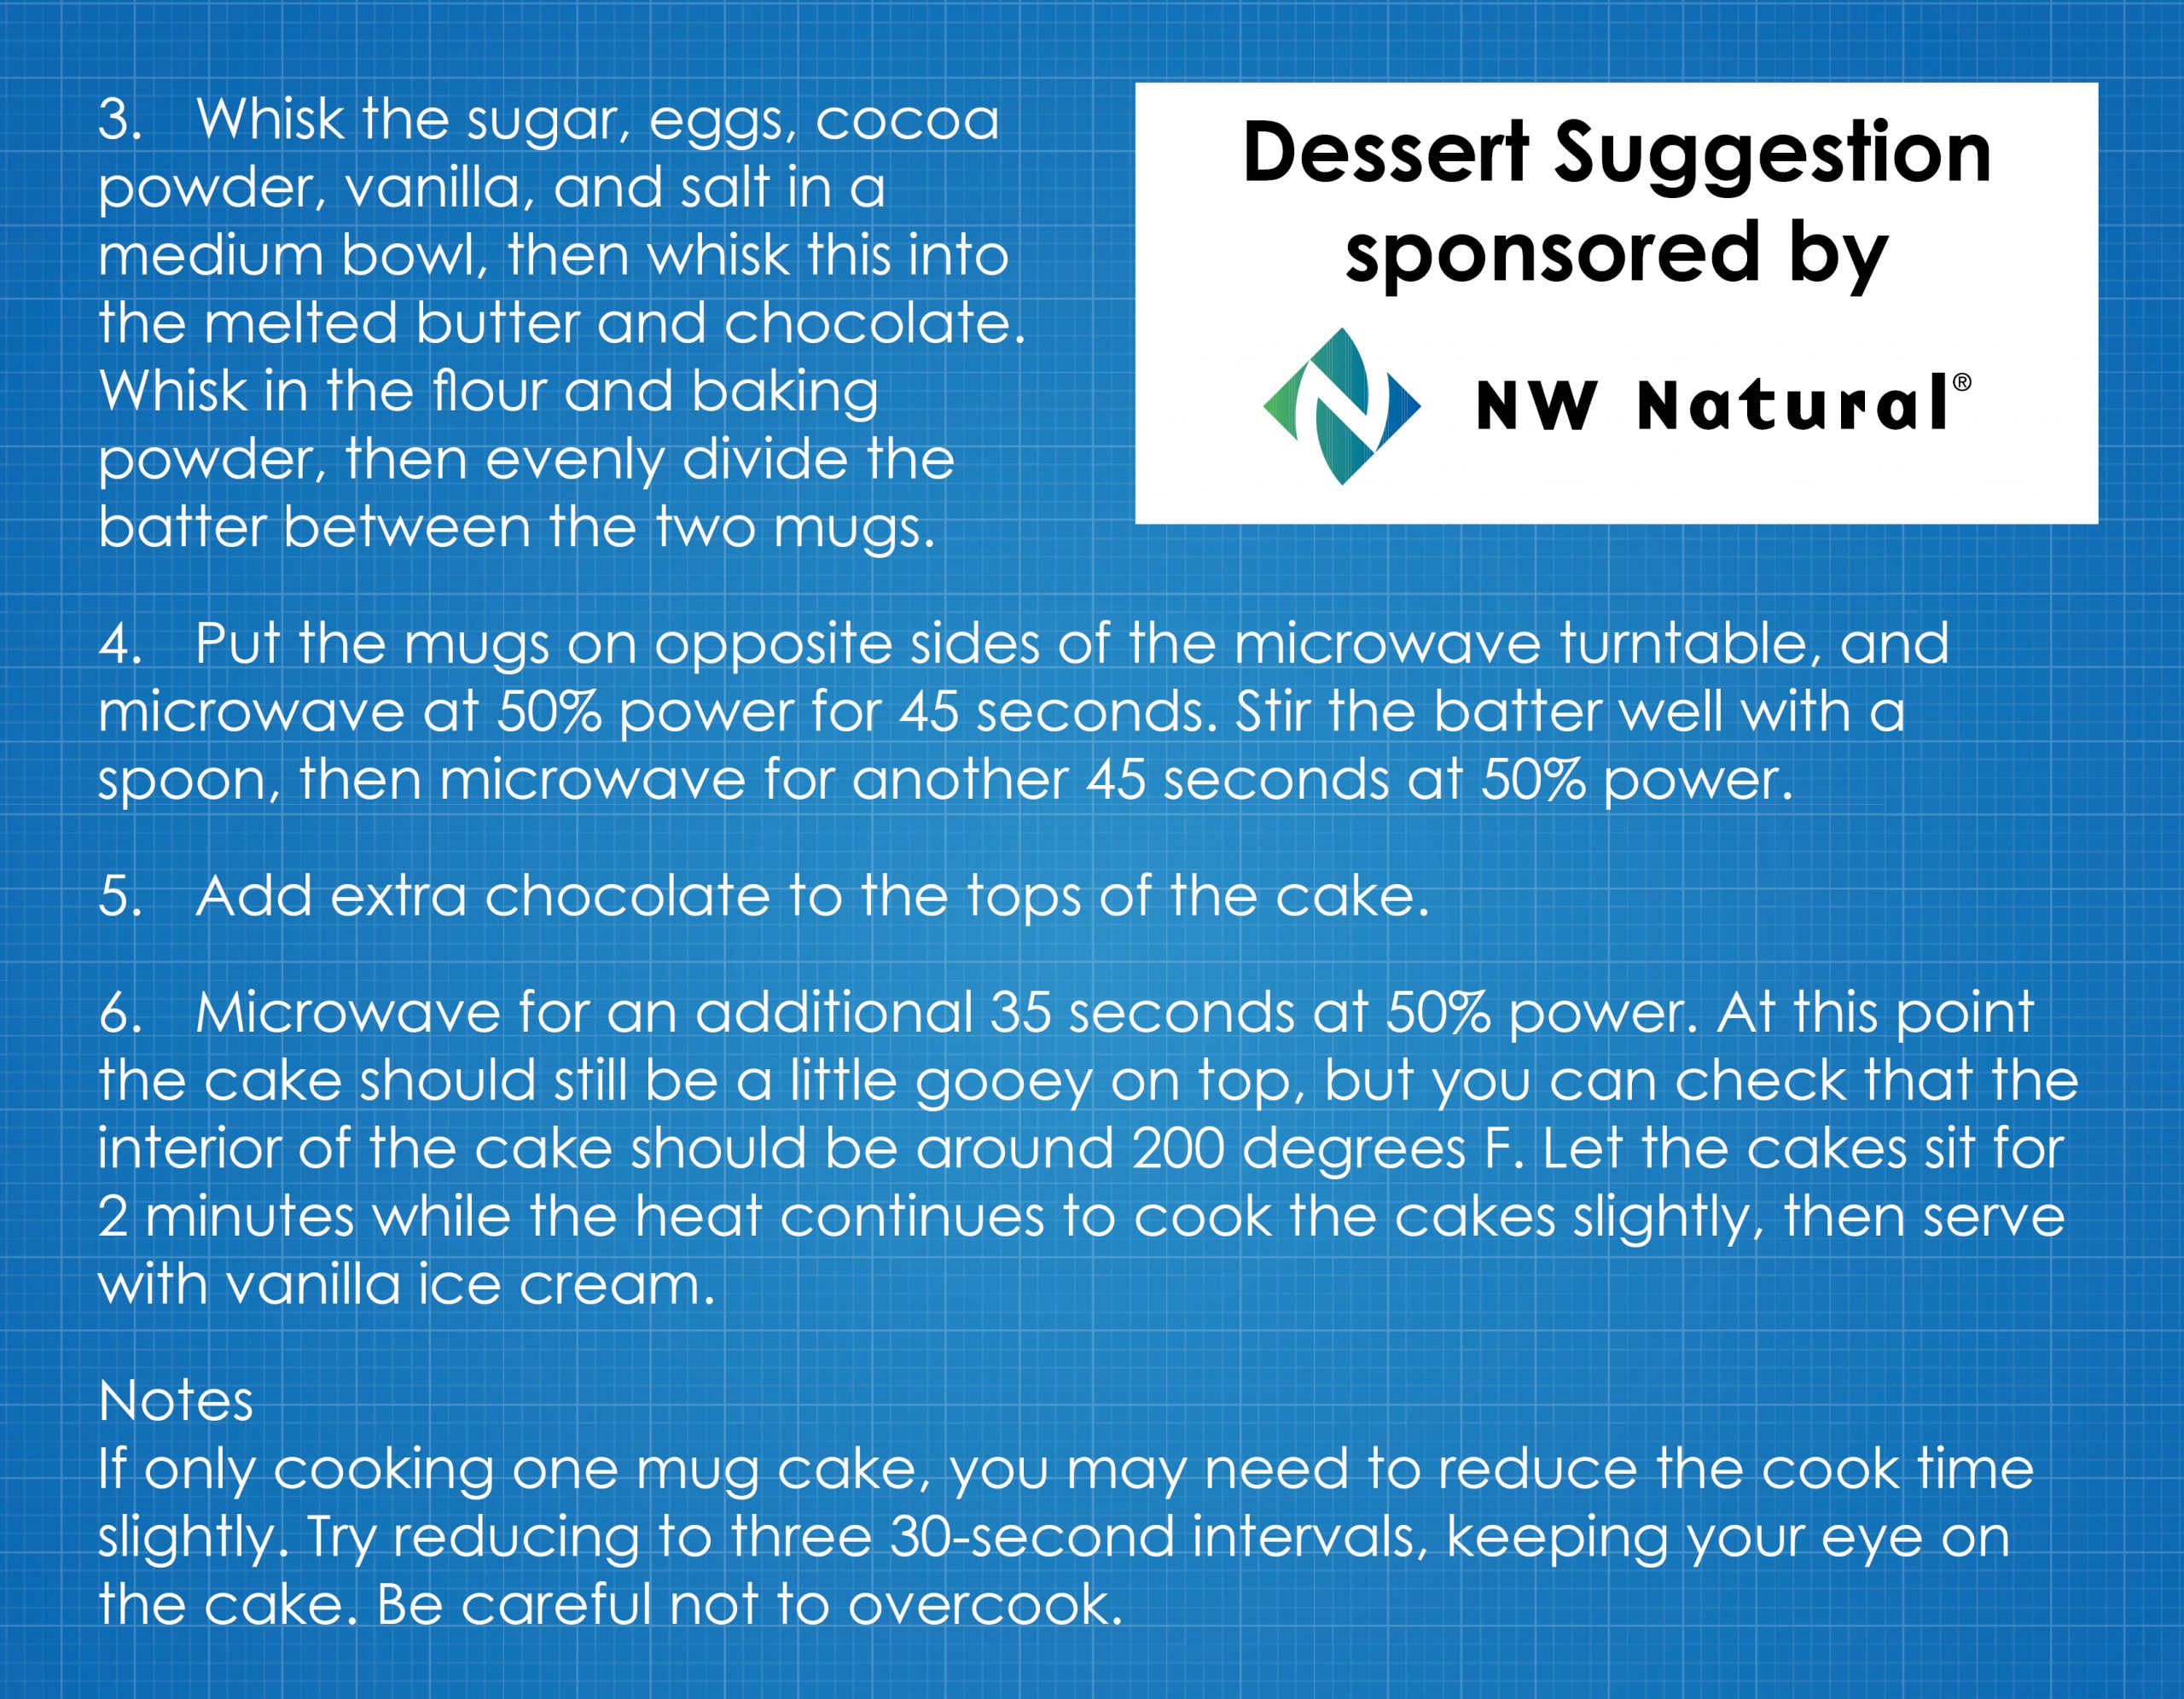 Dessert Suggestion From NW Natural